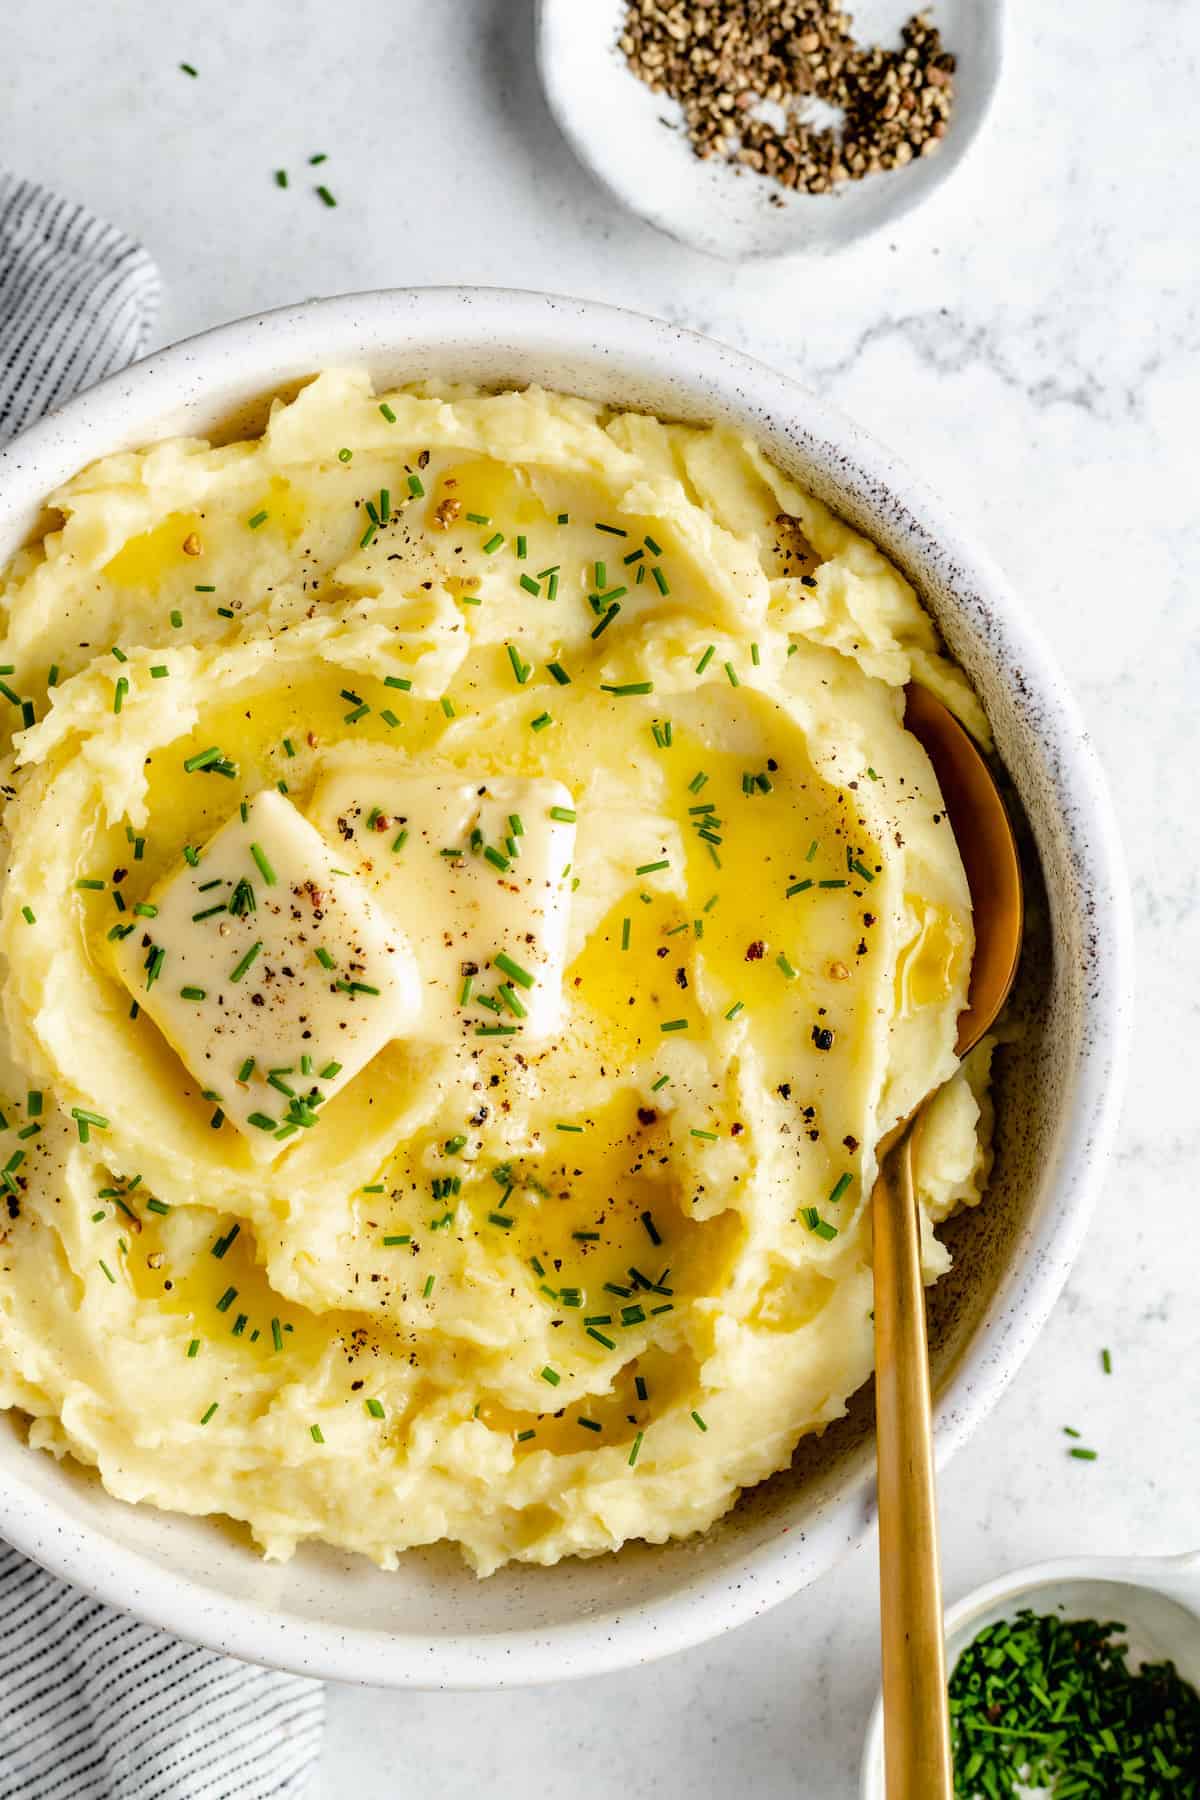 Overhead shot of mashed potatoes in bowl topped with pats of butter and herbs